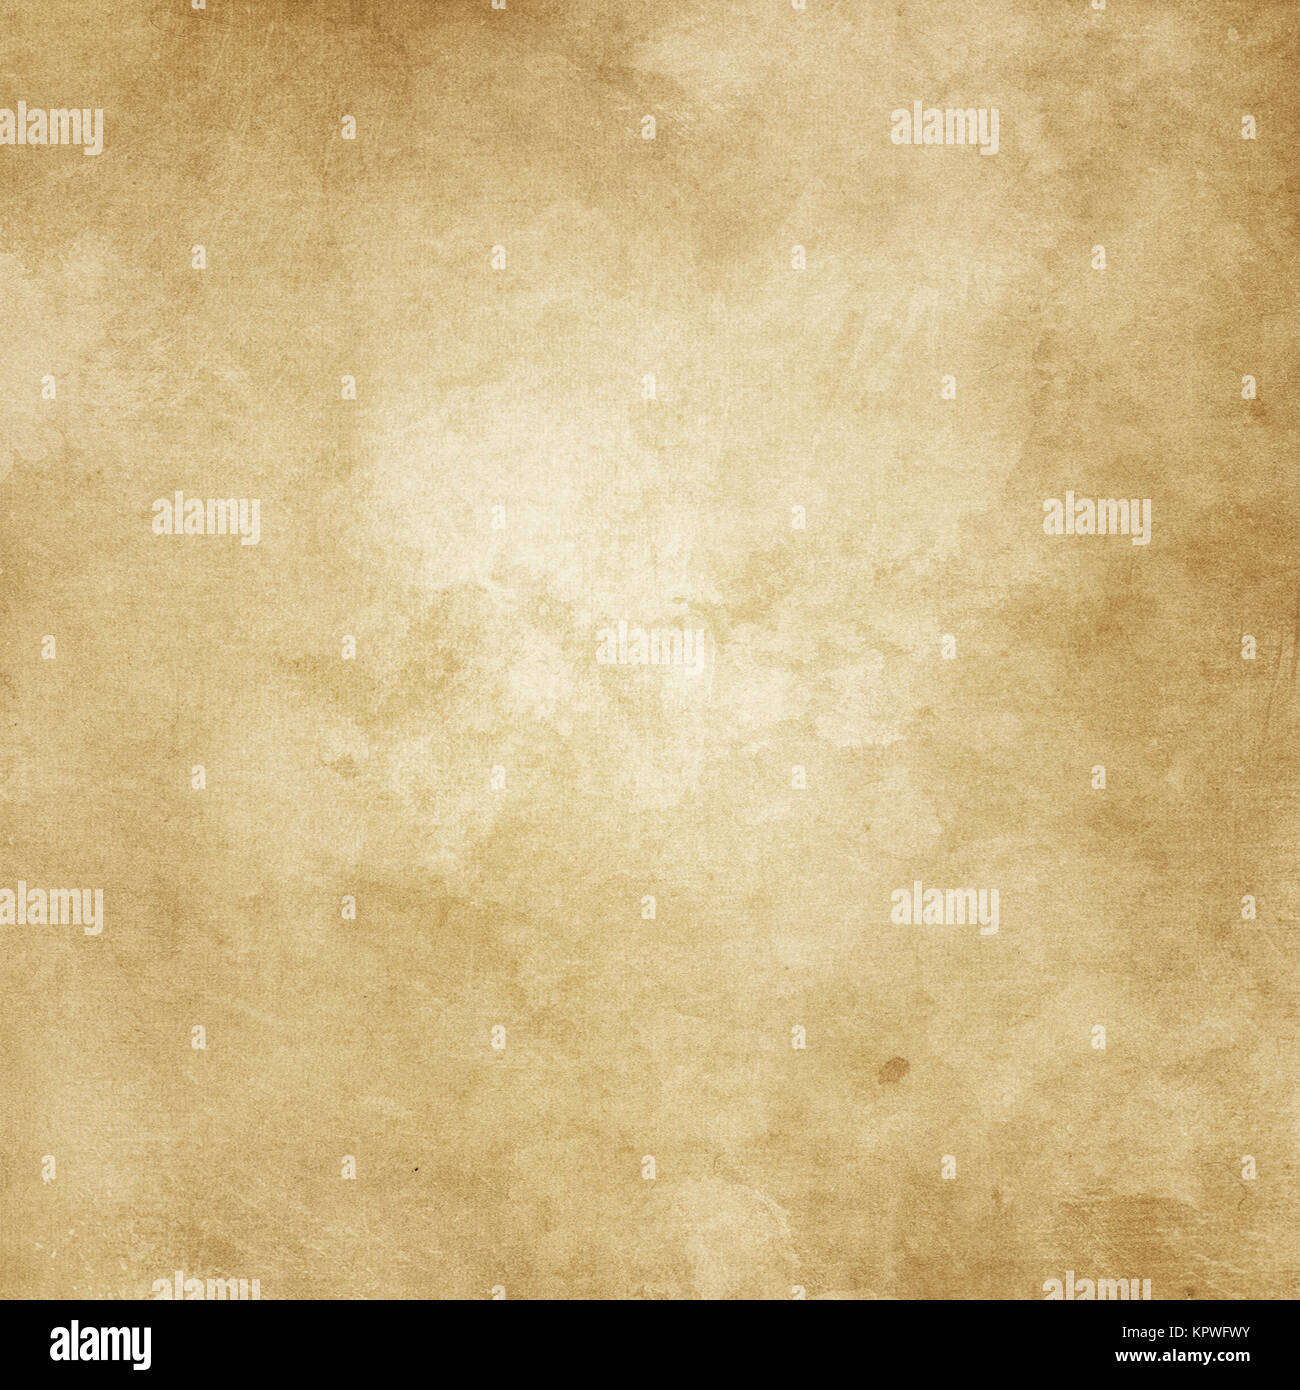 Grunge style paper background with stains and splats. Stock Photo